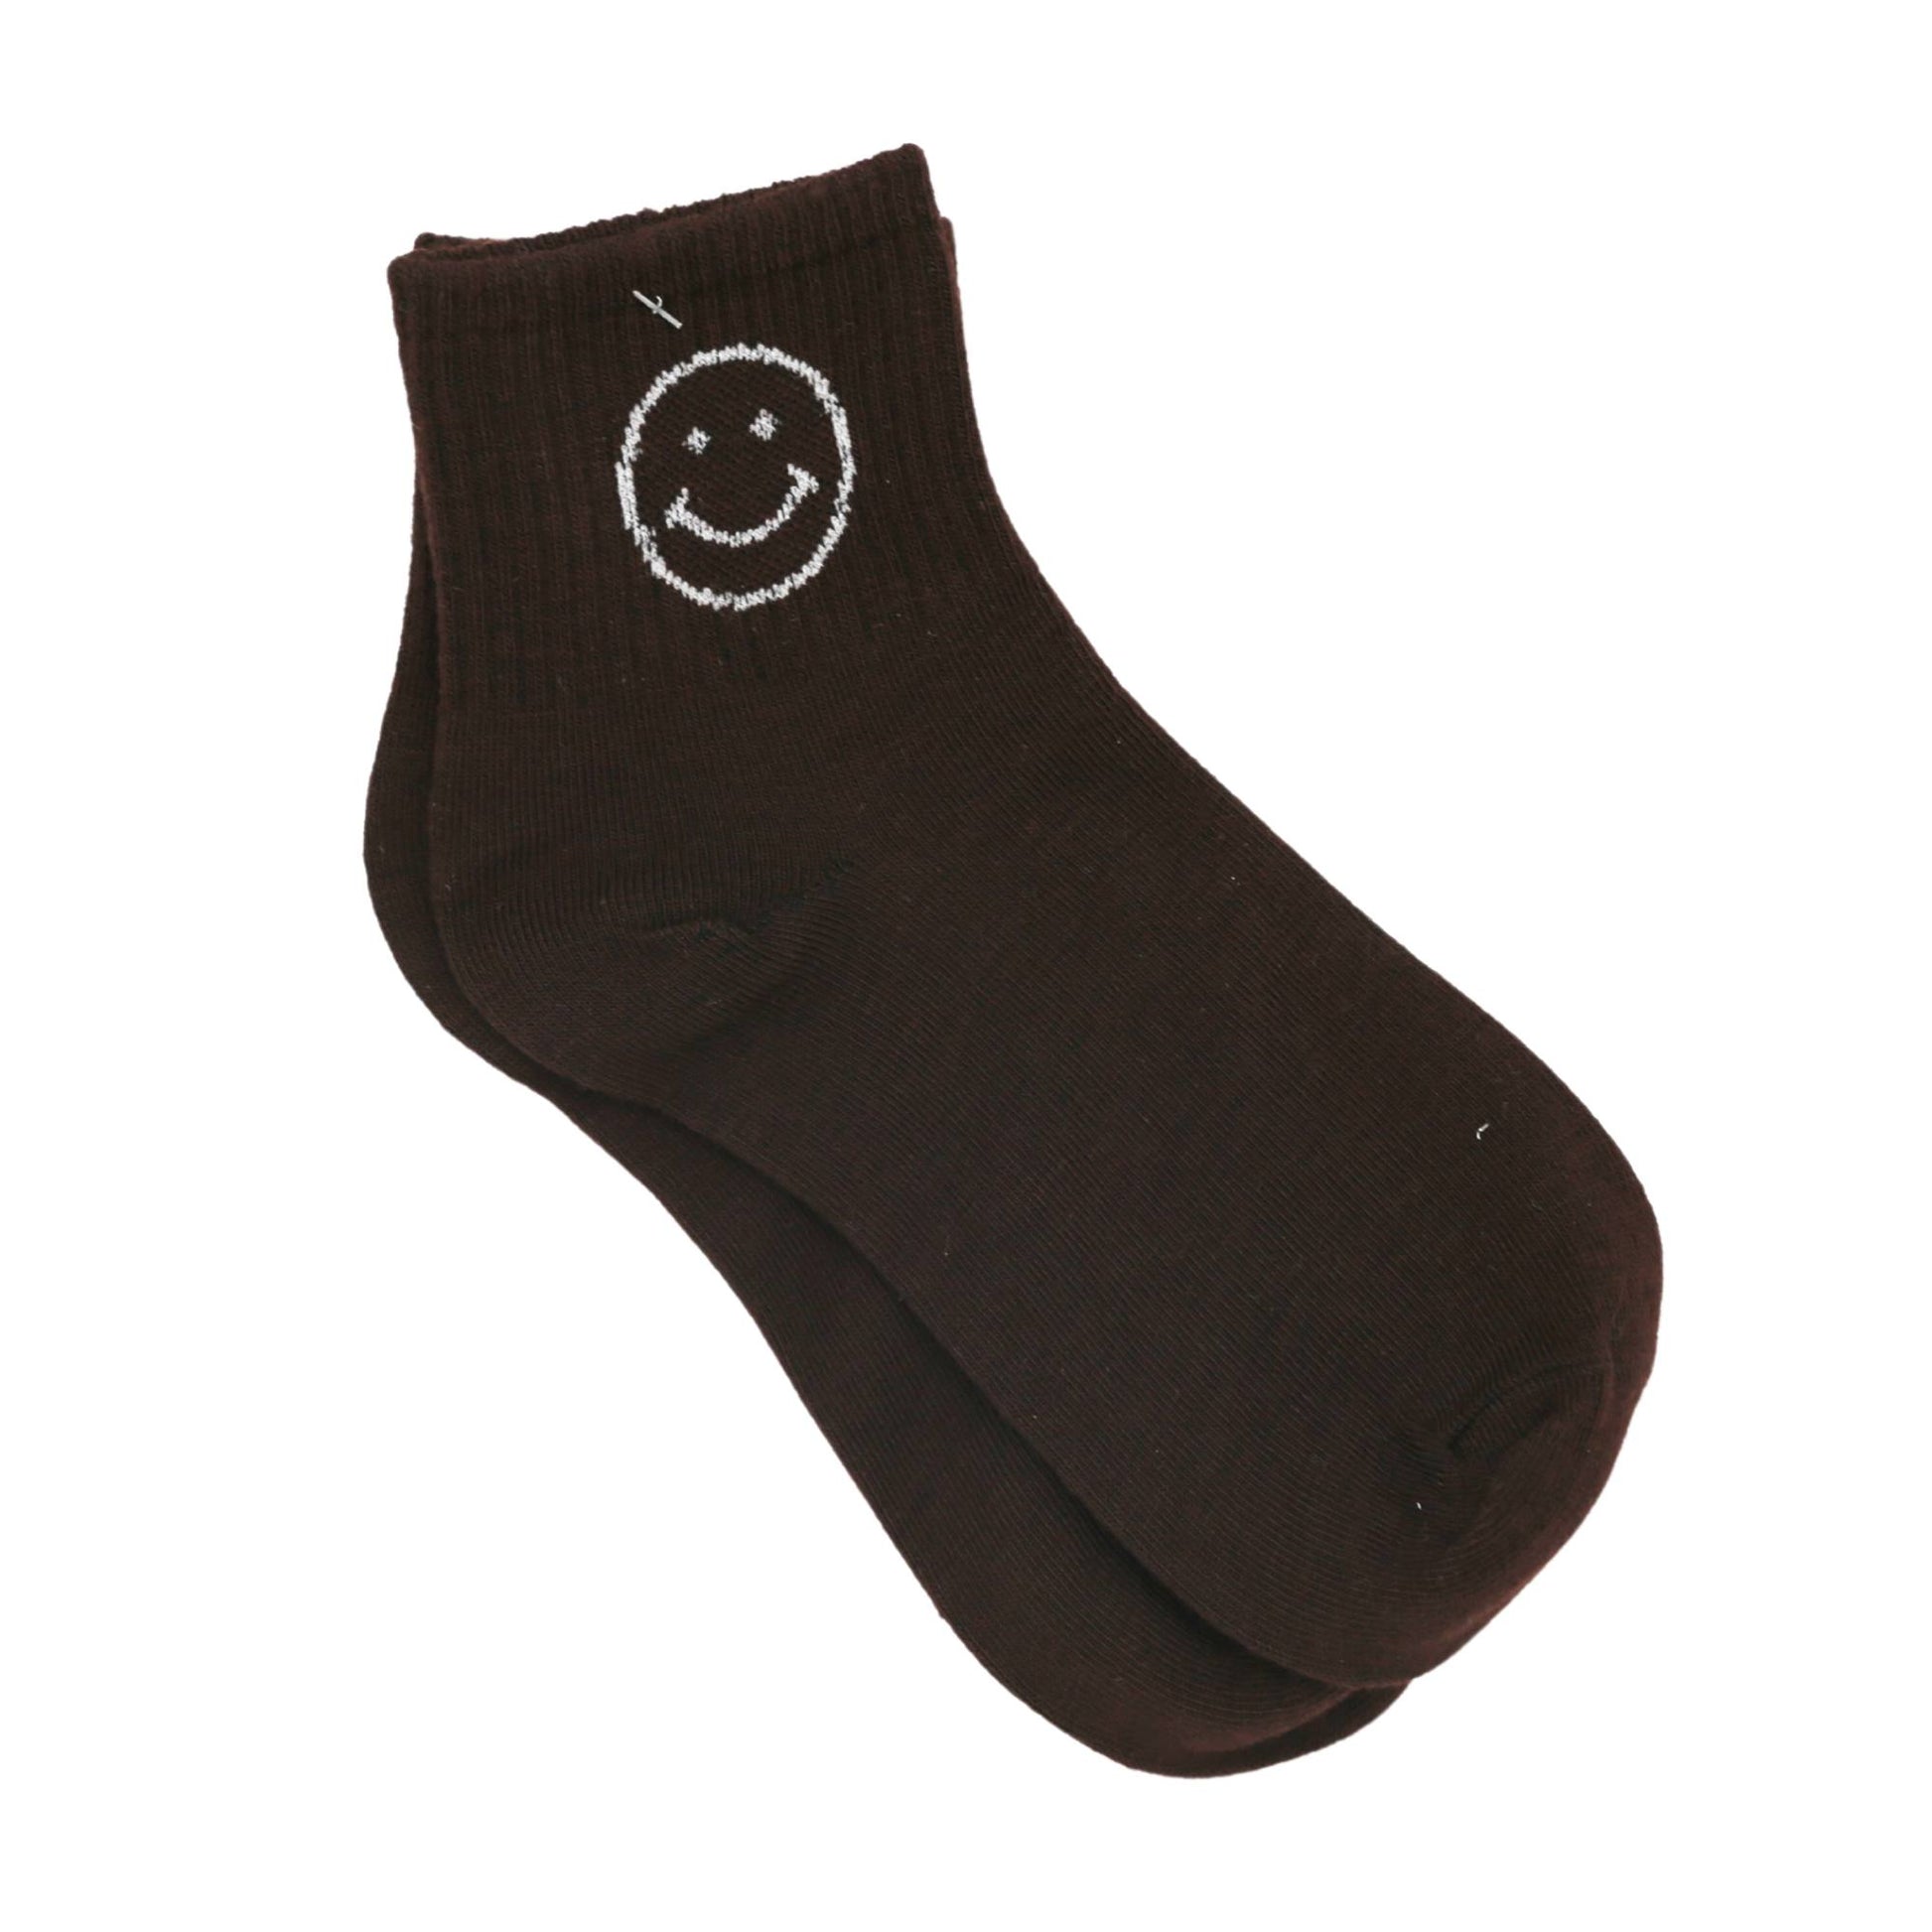 Baby Cubby Women's Crew Smiling Face Socks - Brown